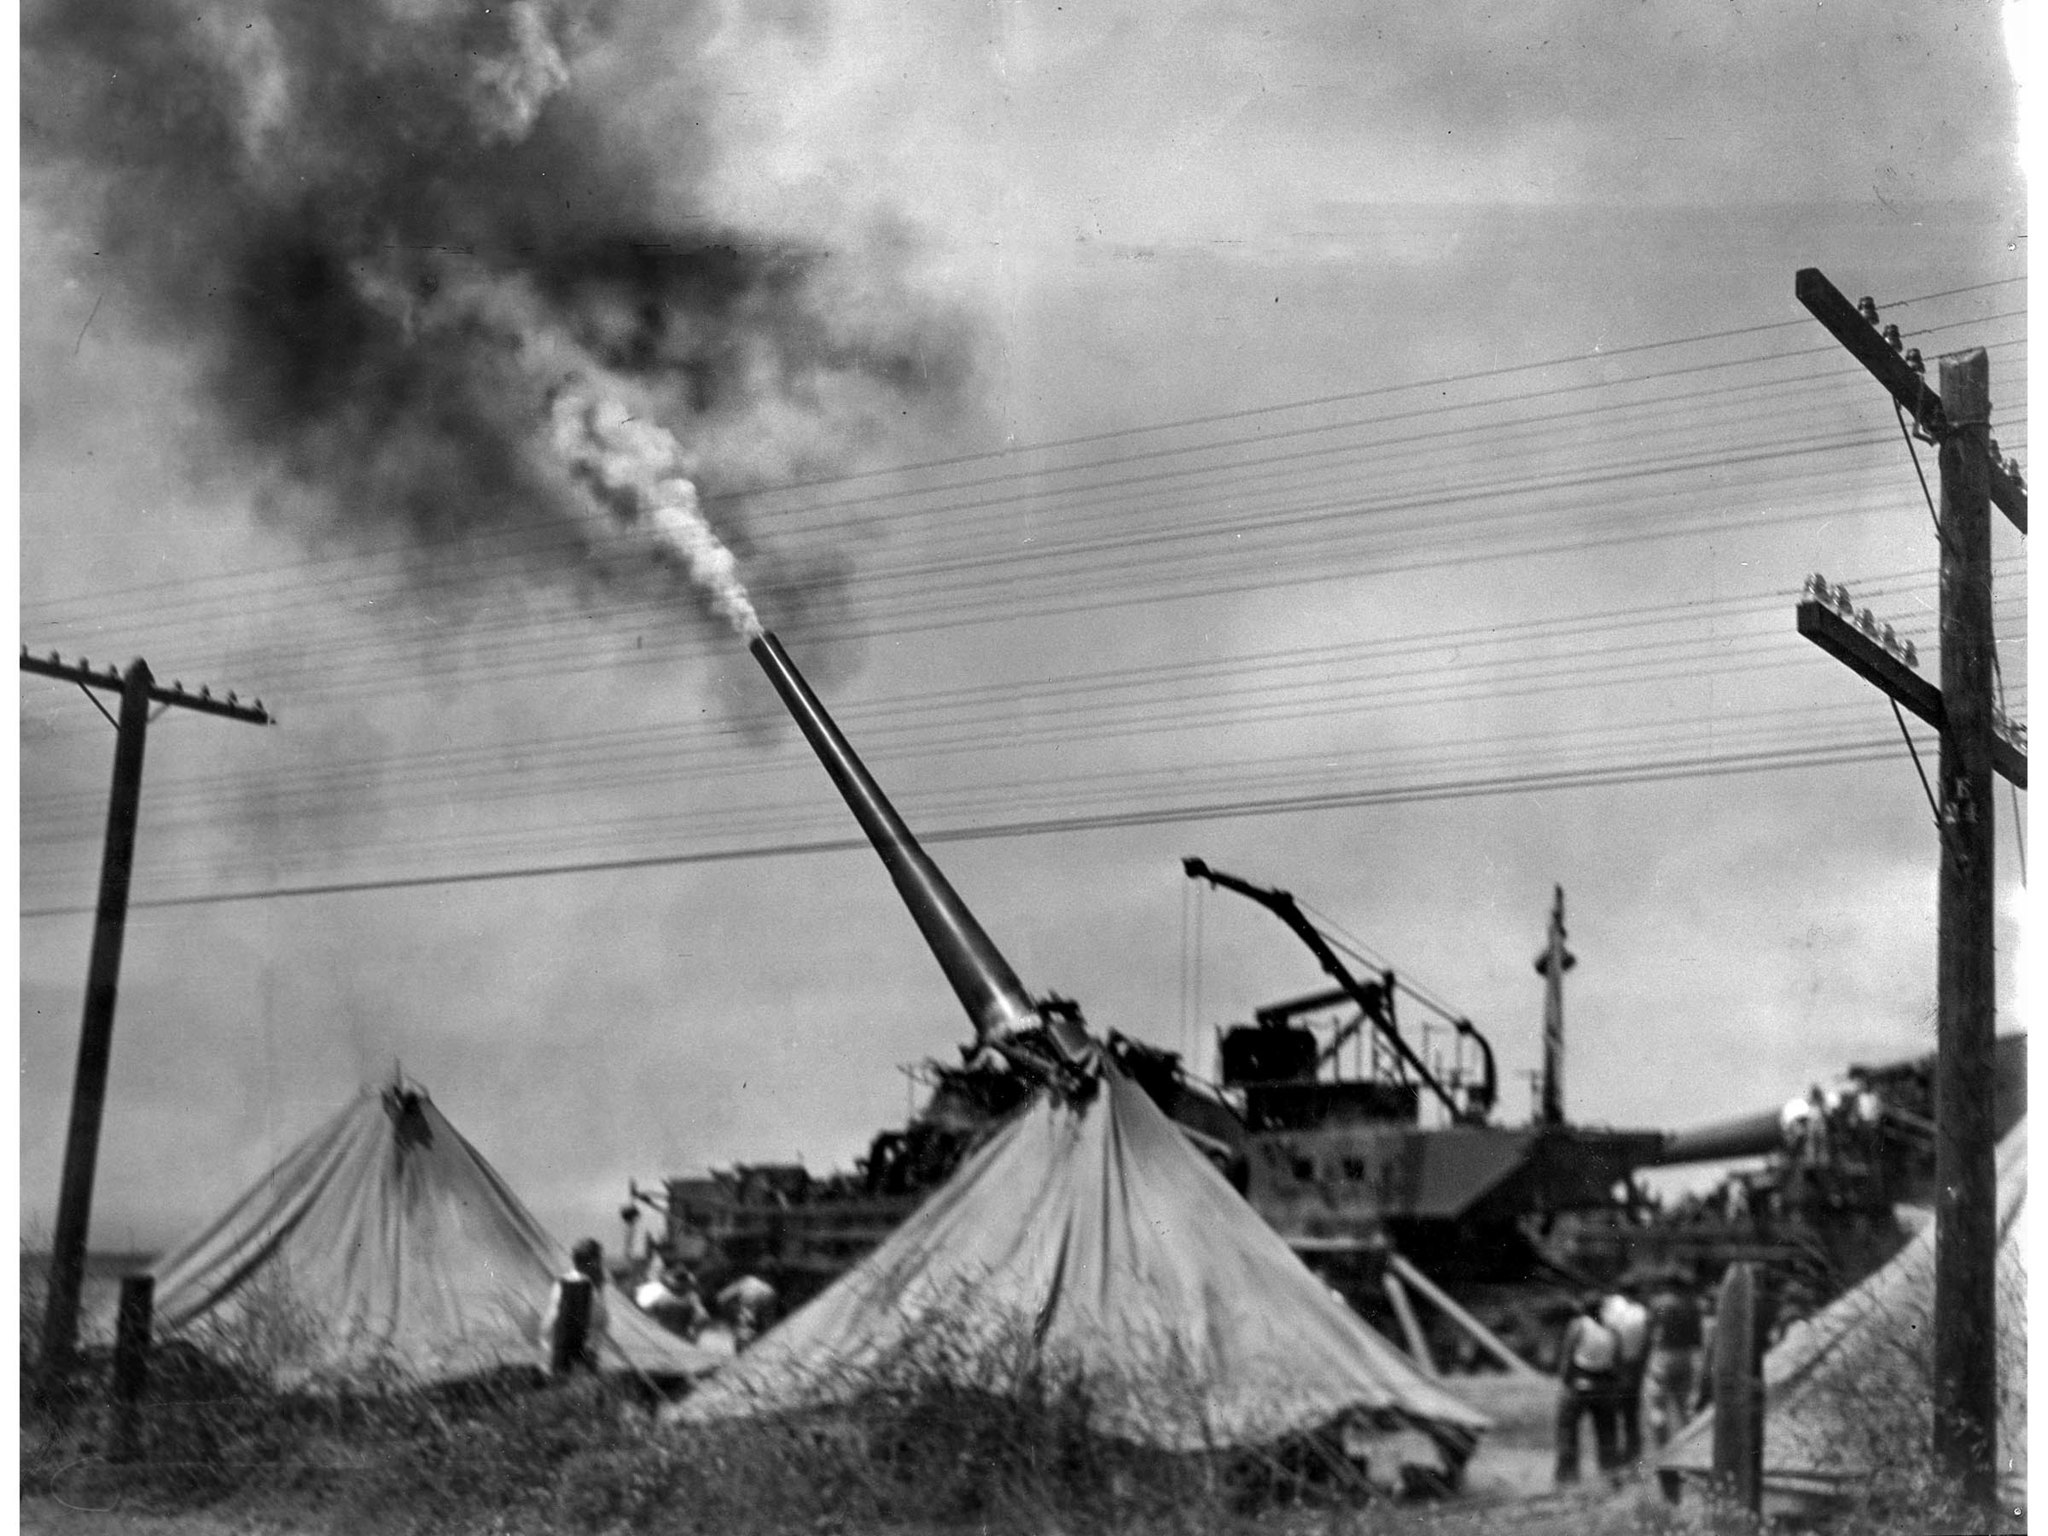 June 12, 1936: United States Army Coast Defense 14-inch railway gun is is fired during target practi